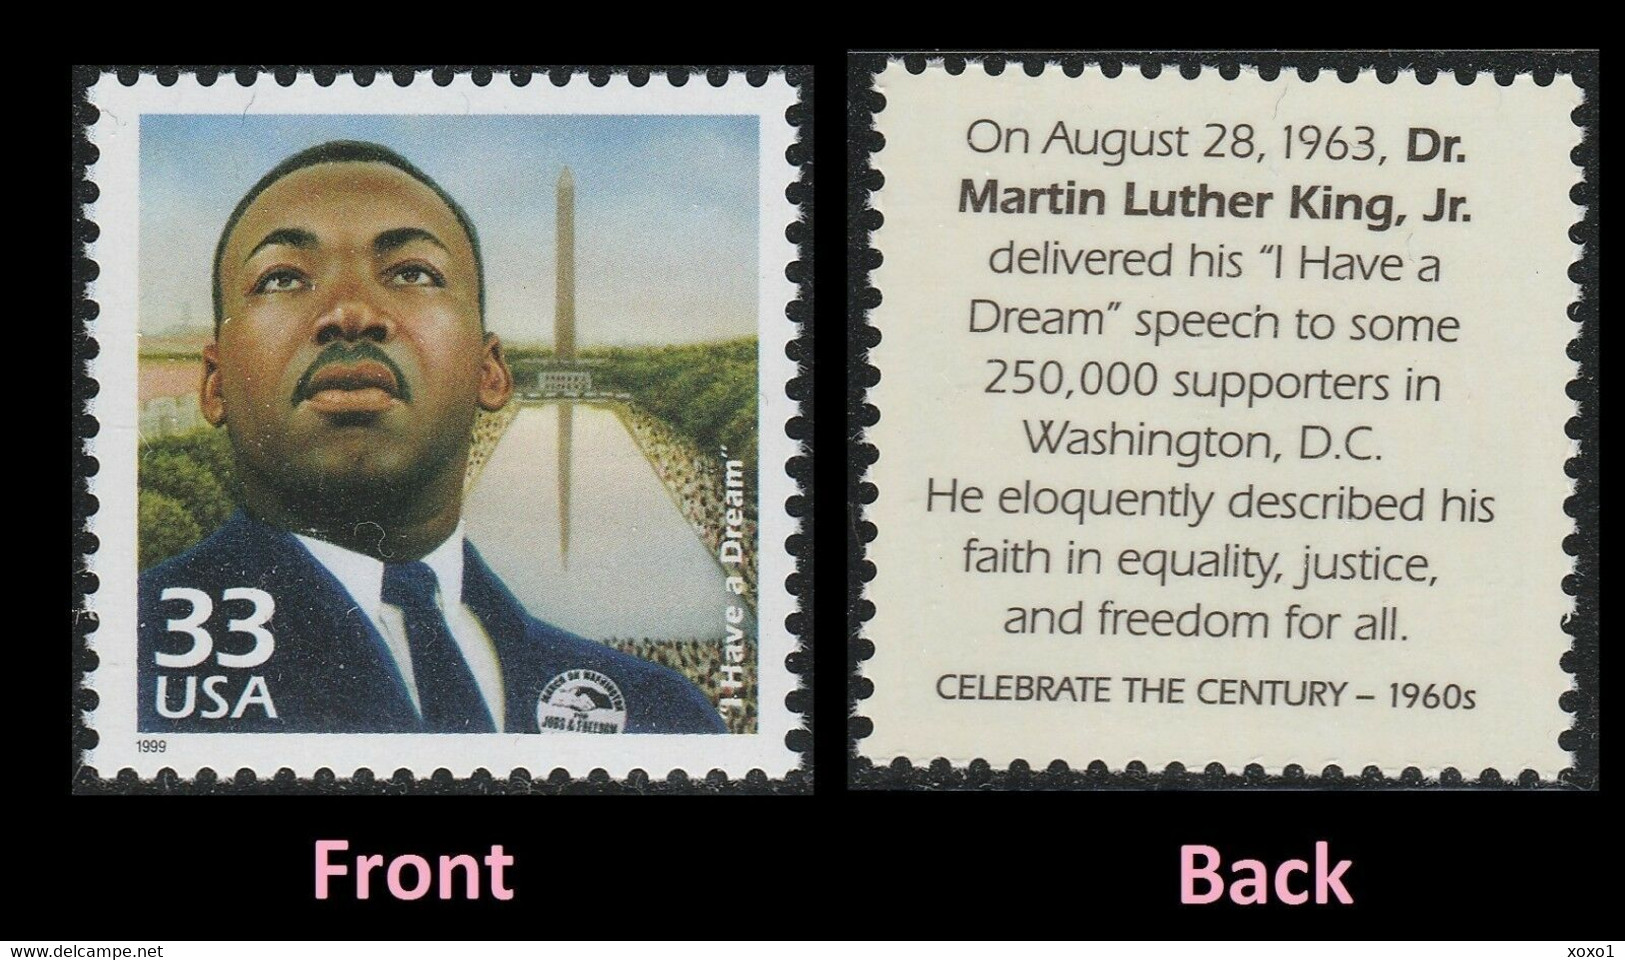 USA 1999 MiNr. 3171 Celebrate The Century 1960s Martin Luther King Civil Rights Activist Baptist Pastor 1v MNH ** 0,80 € - Martin Luther King